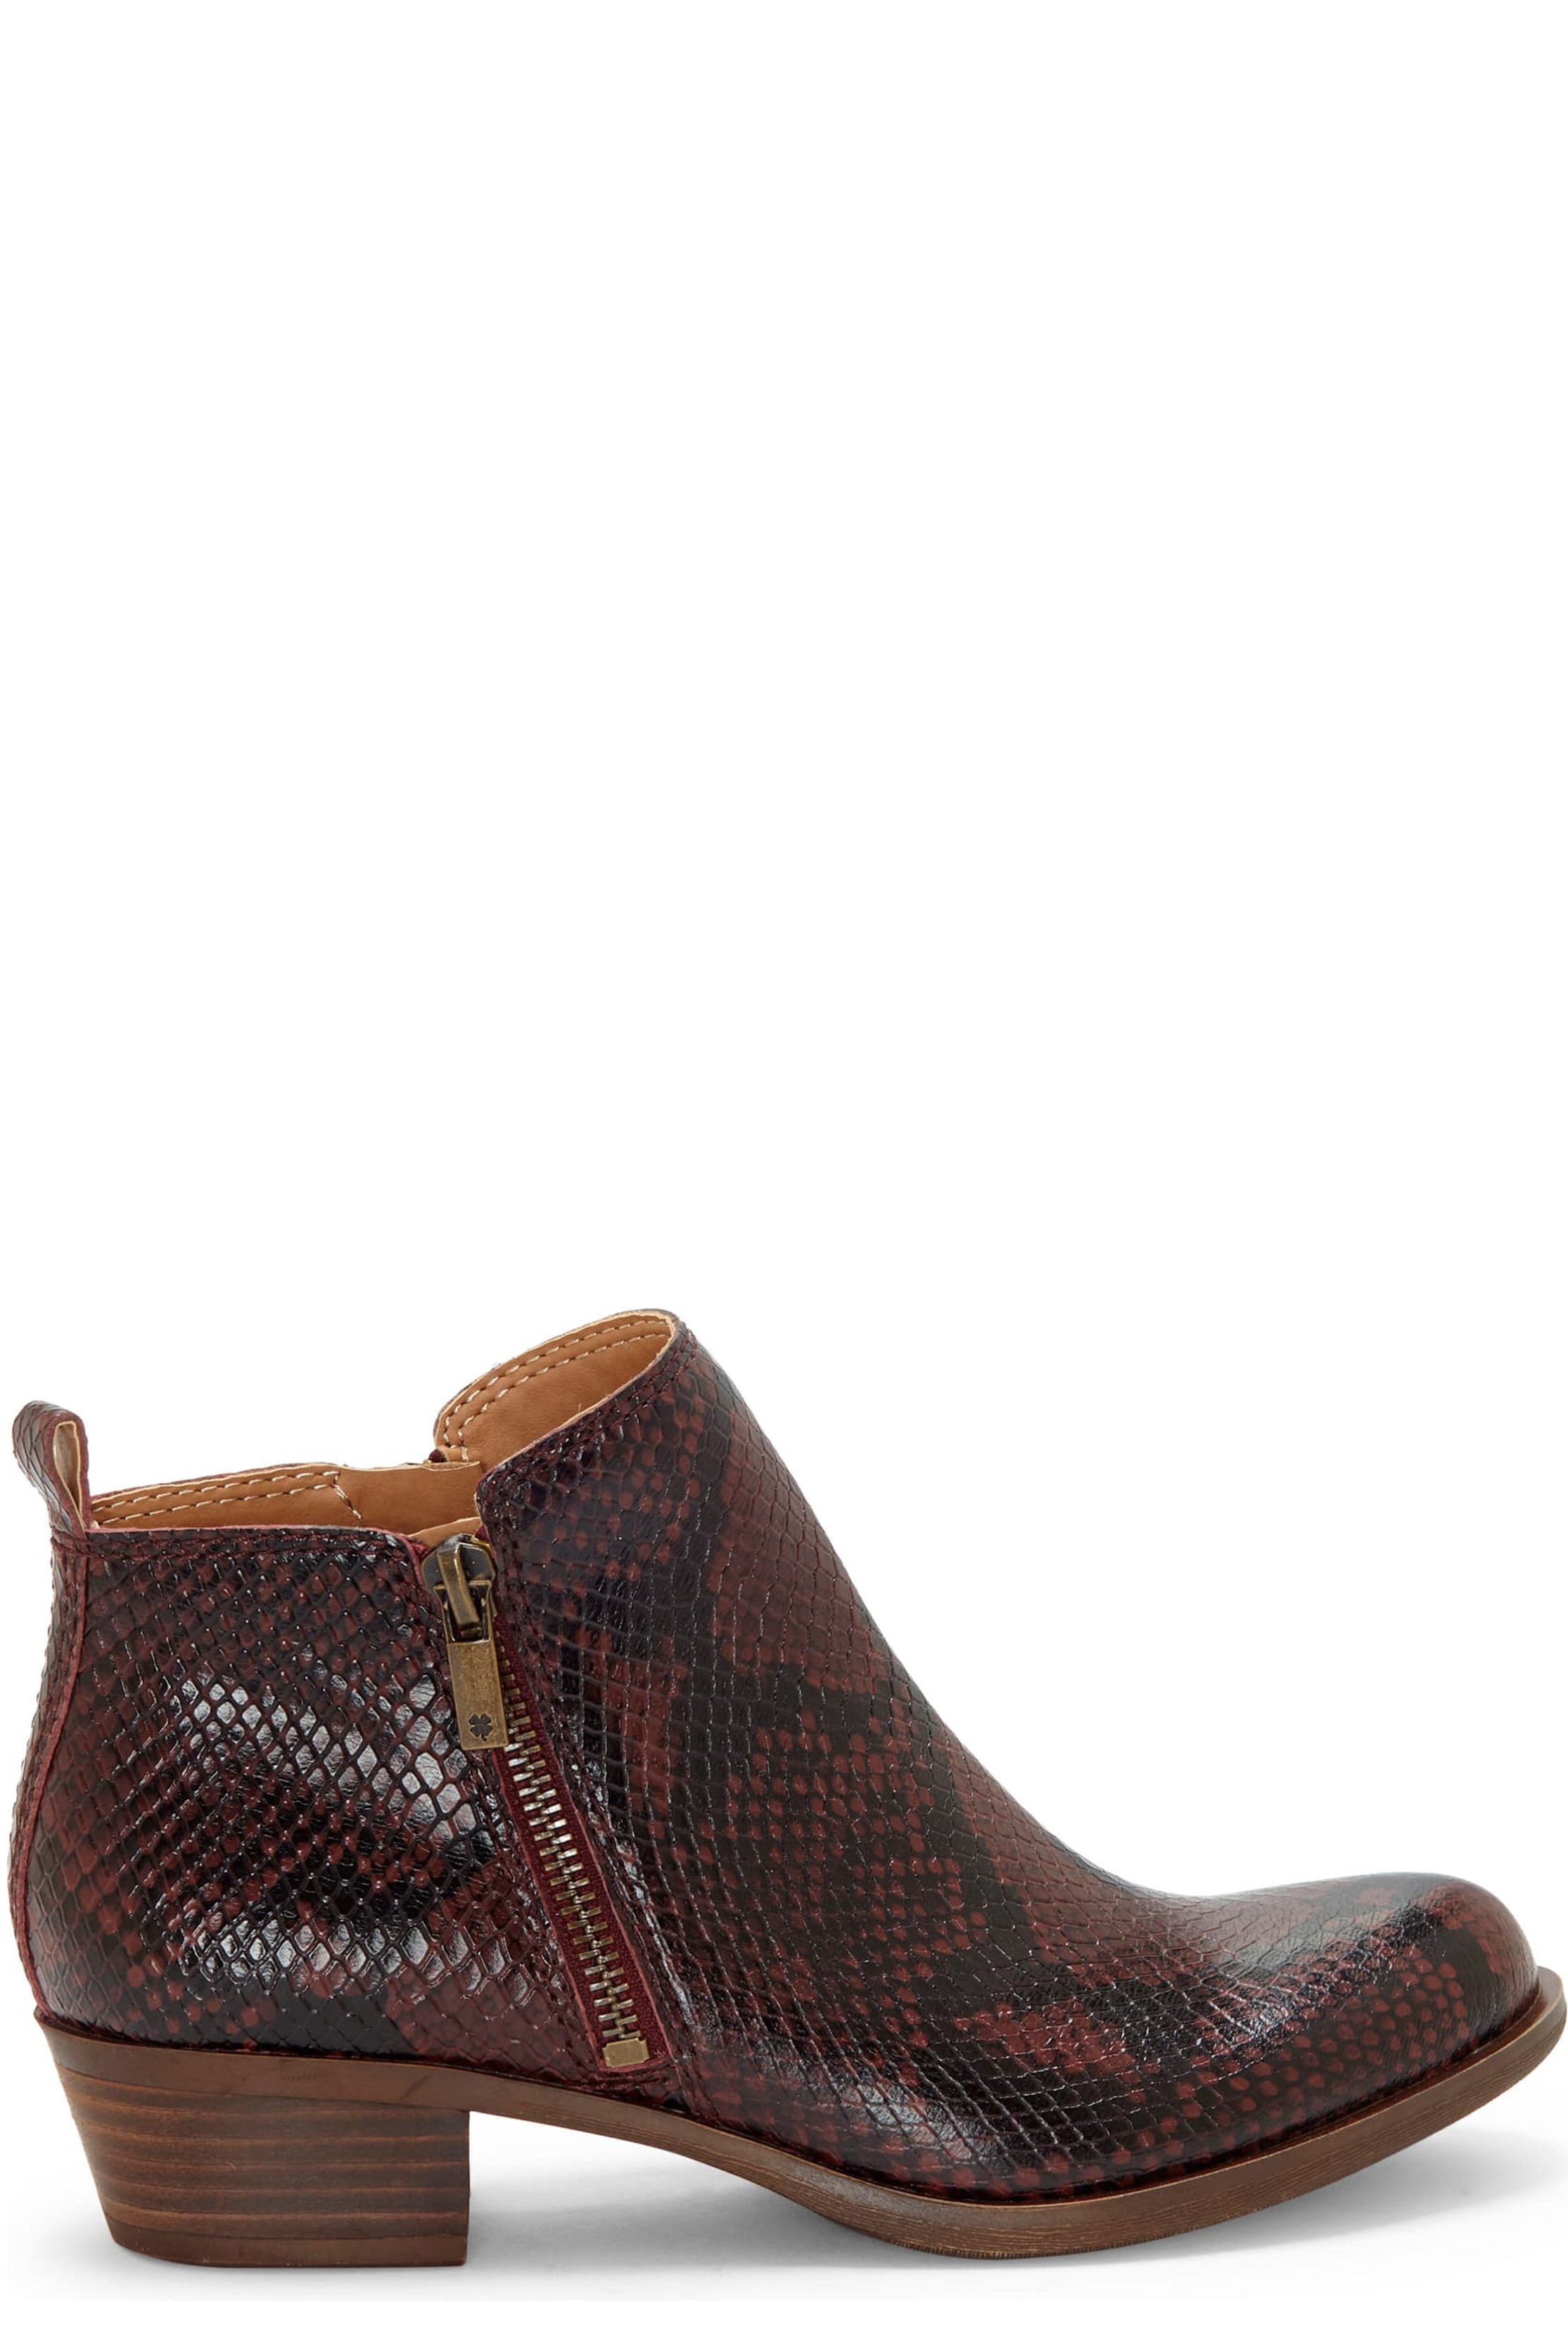 lucky brand basel ankle bootie